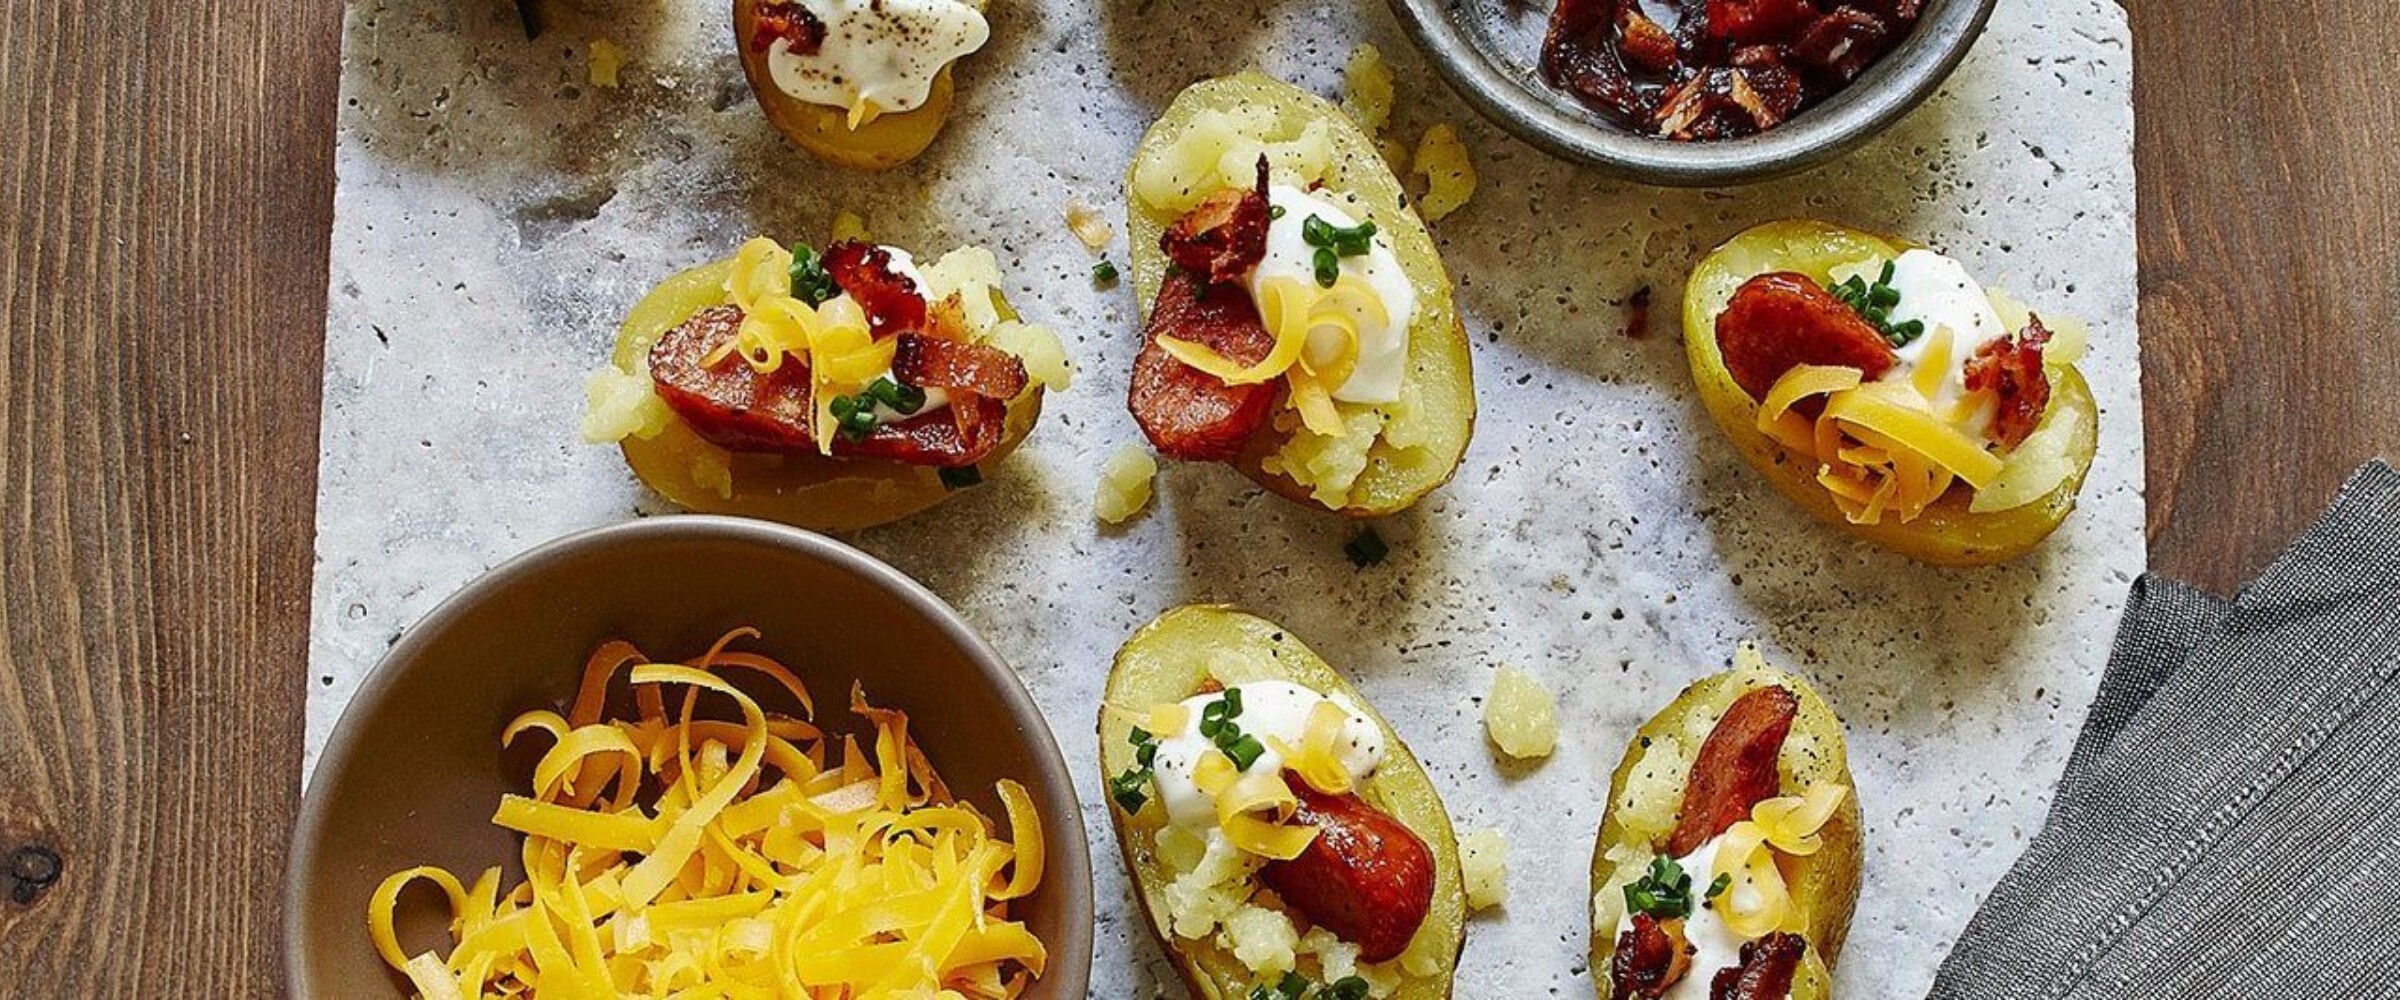 Loaded baked potatoes with pepperoni